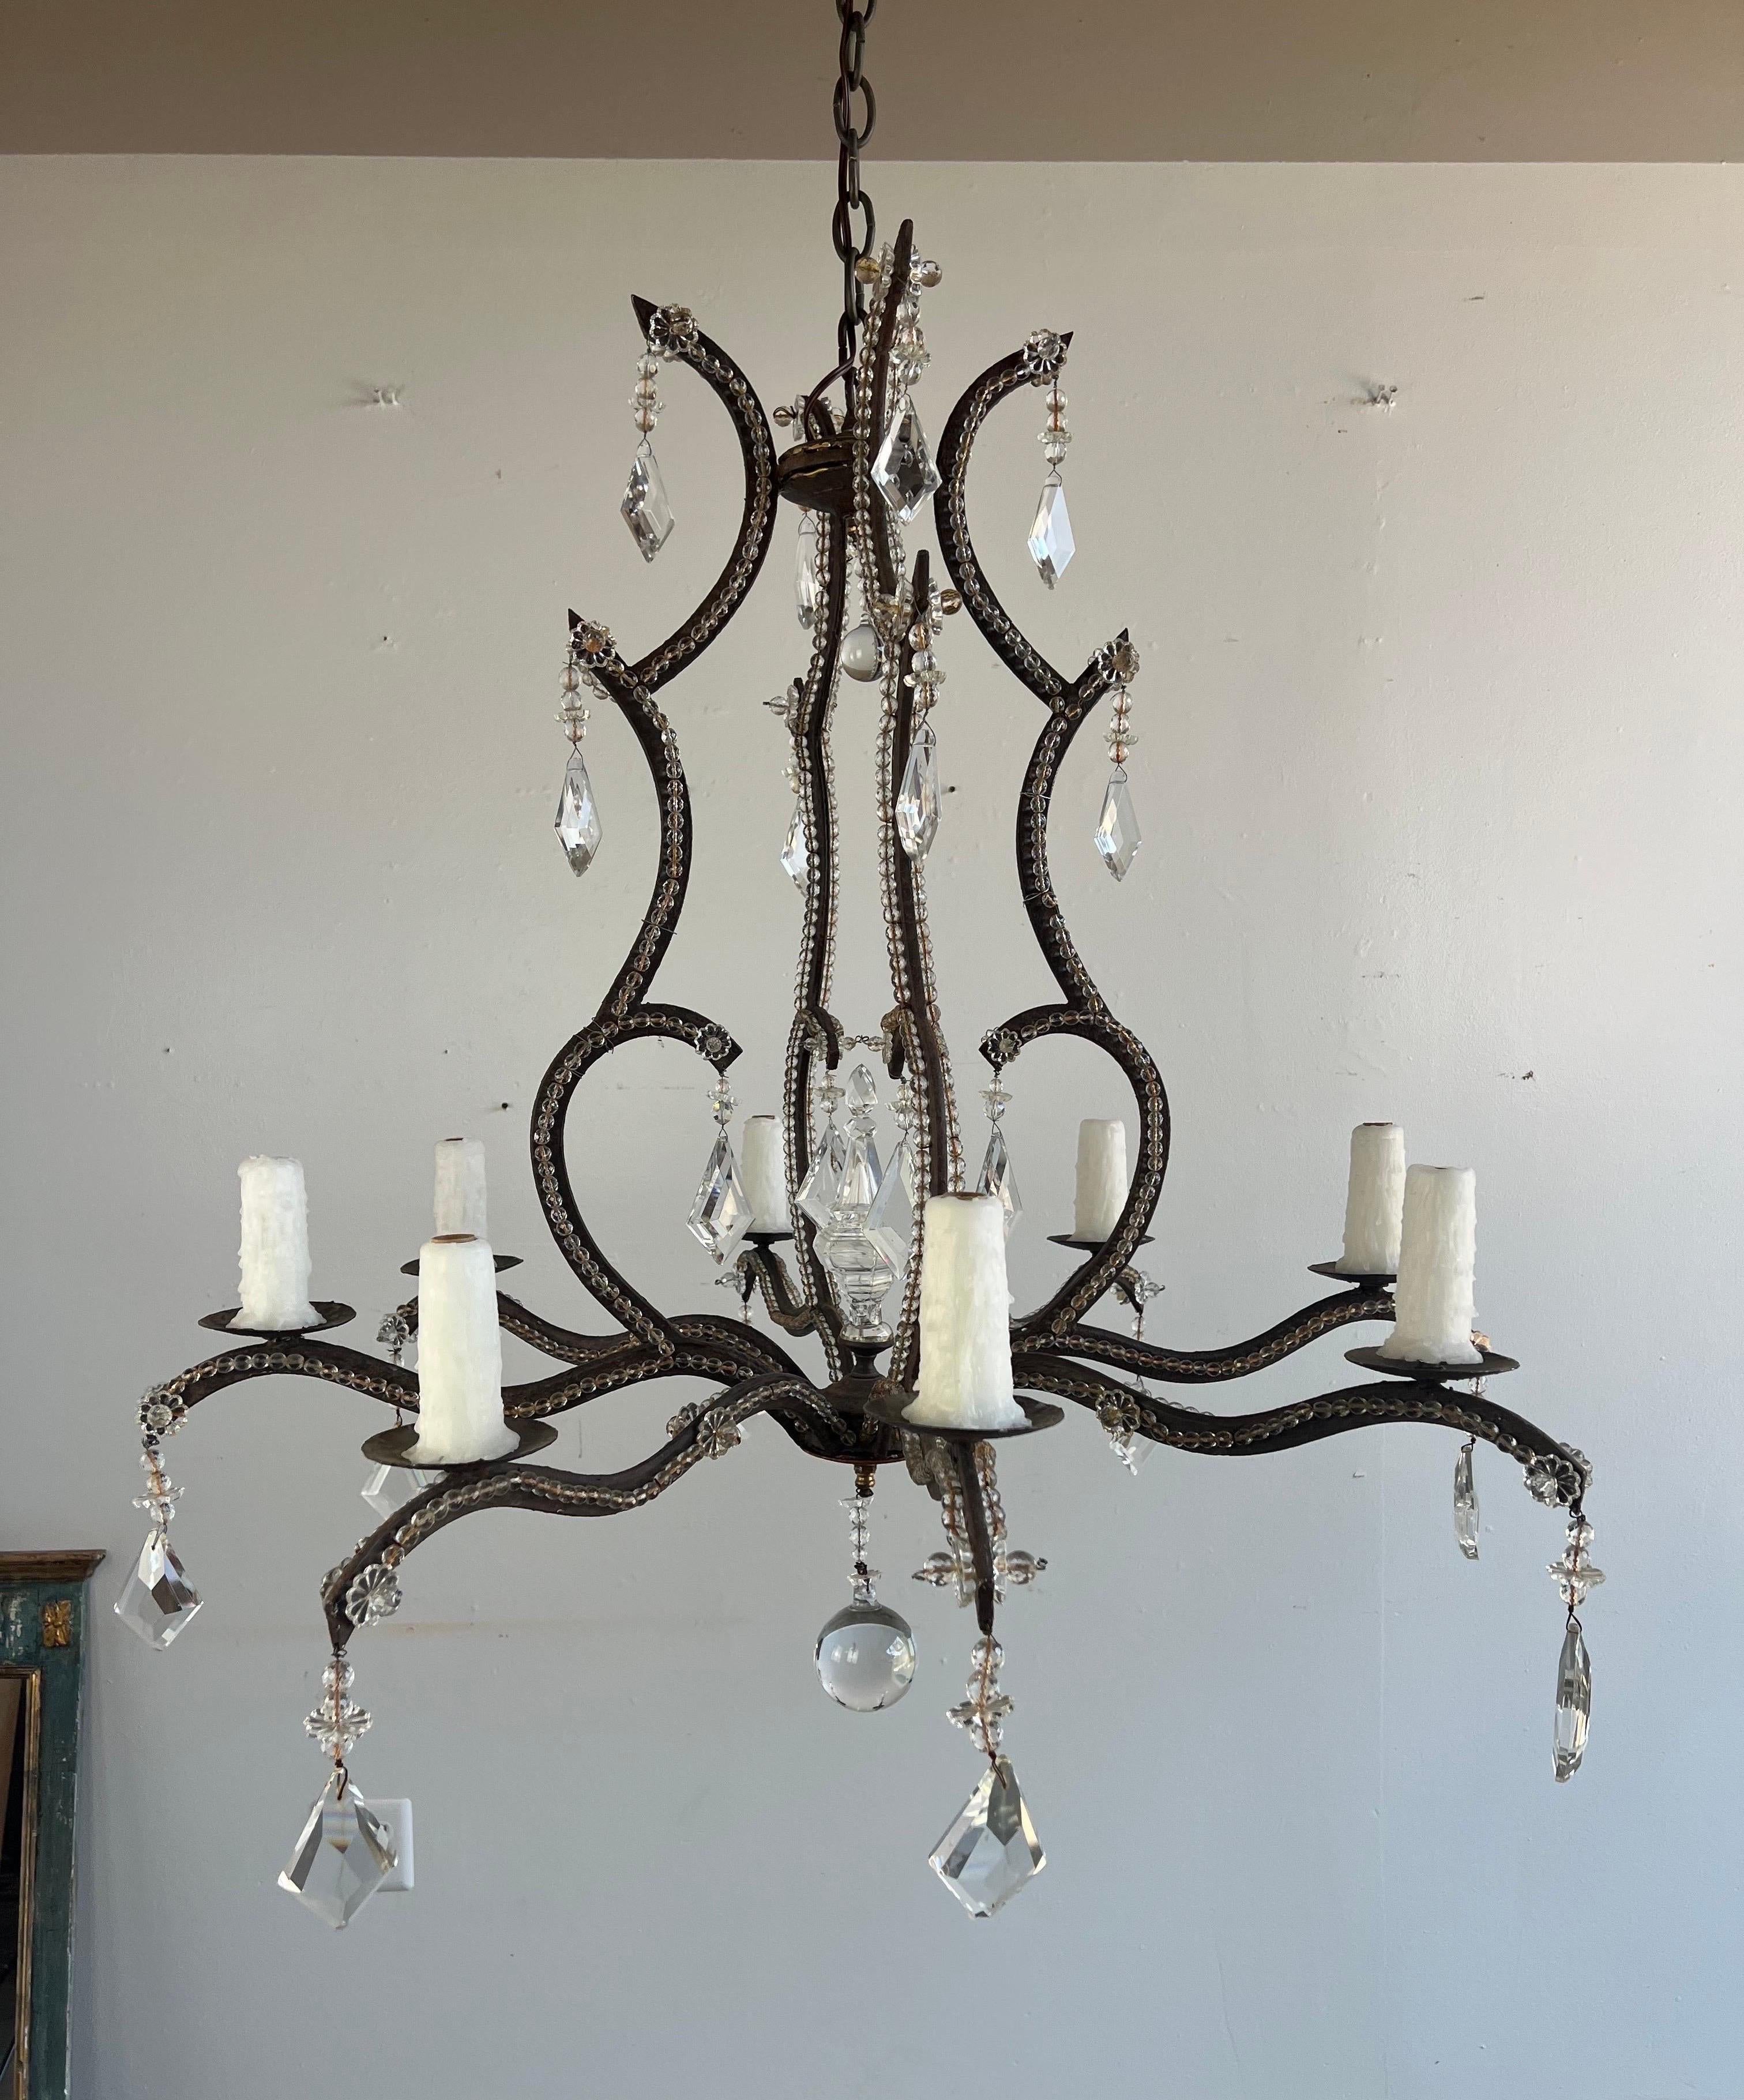 1930's Spanish wrought iron (8) light chandelier with diamond shaped crystals throughout.  The chandelier is newly rewired with drip wax candle covers.  Includes chain & canopy.